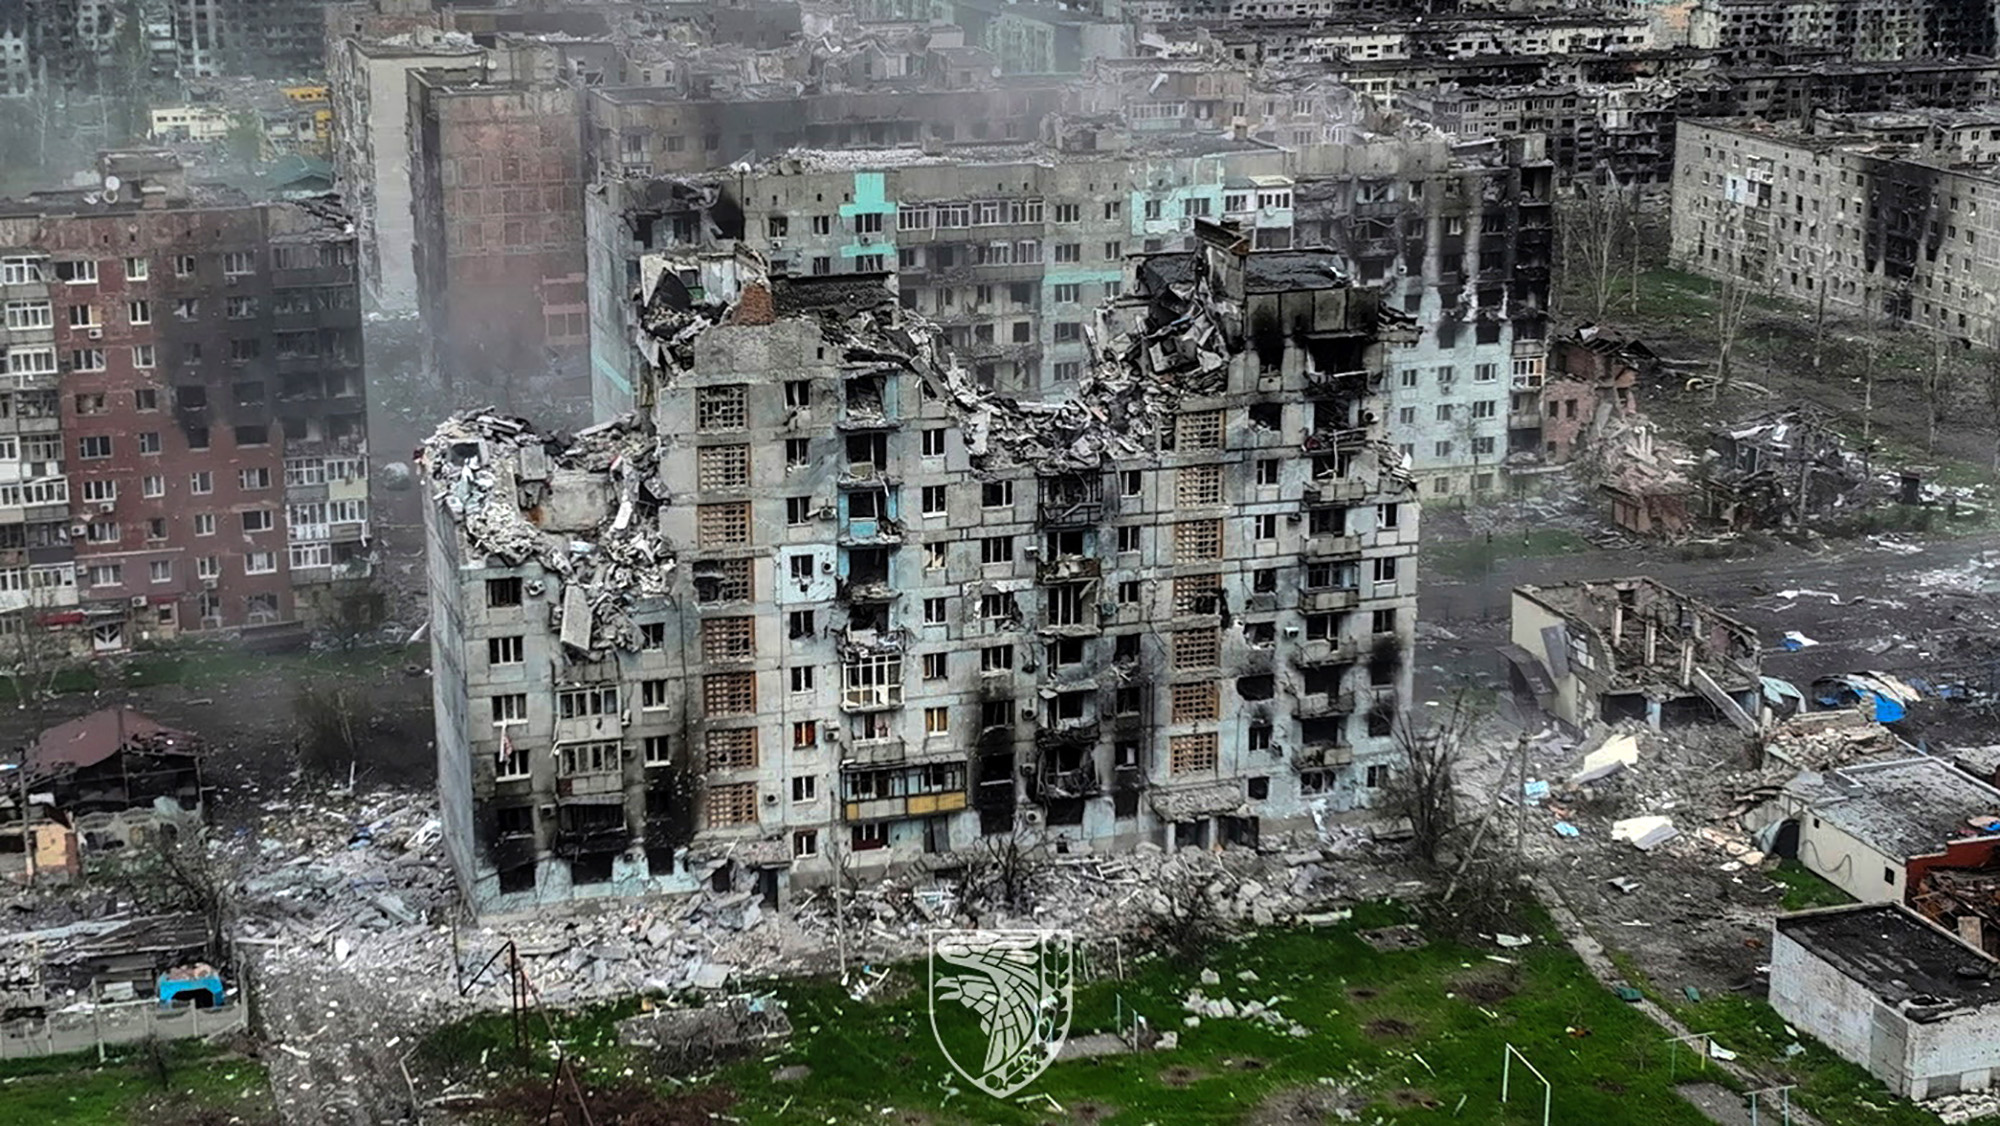 An aerial view shows destruction in the frontline town of Bakhmut in Donetsk region, Ukraine, in this handout picture released on May 21.